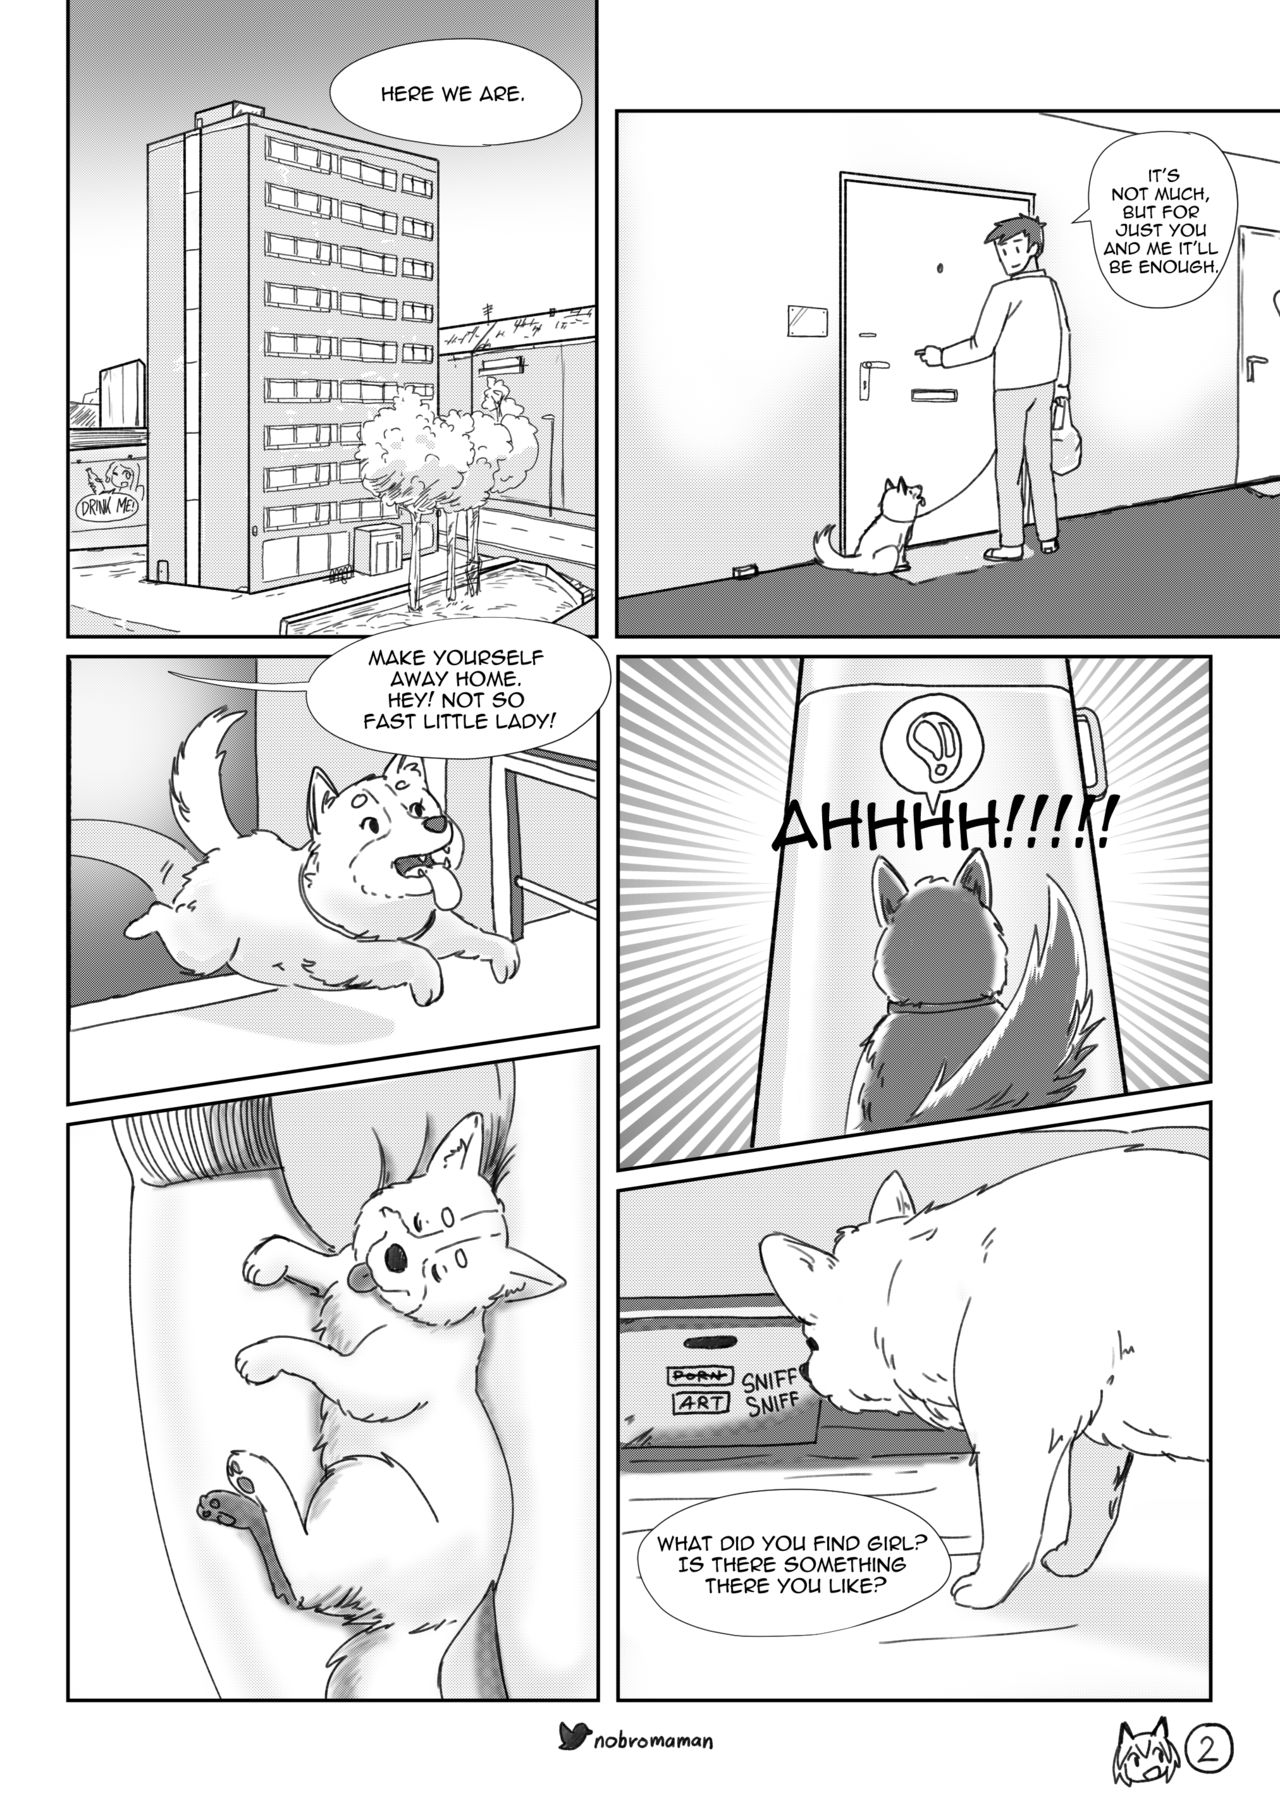 Life with a dog girl - Chapter1 (ongoing) 2